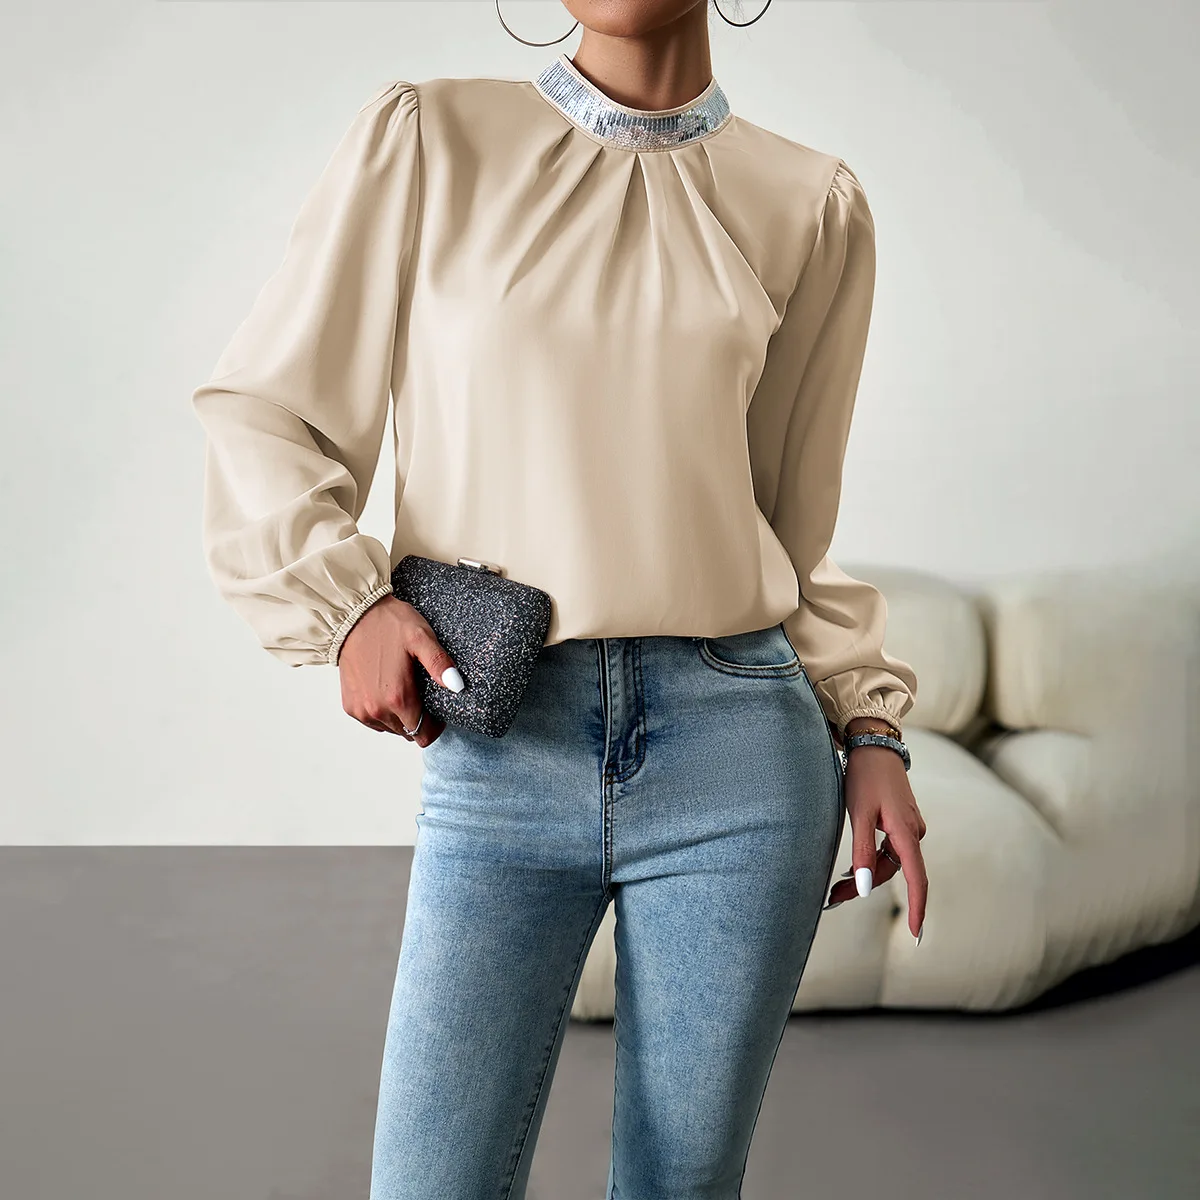 Office Lady Shirts and Blouses Women Tops Long Sleeve Outfit Solid Crewneck Vintage Streetwear Autumn Female Clothing Camisas